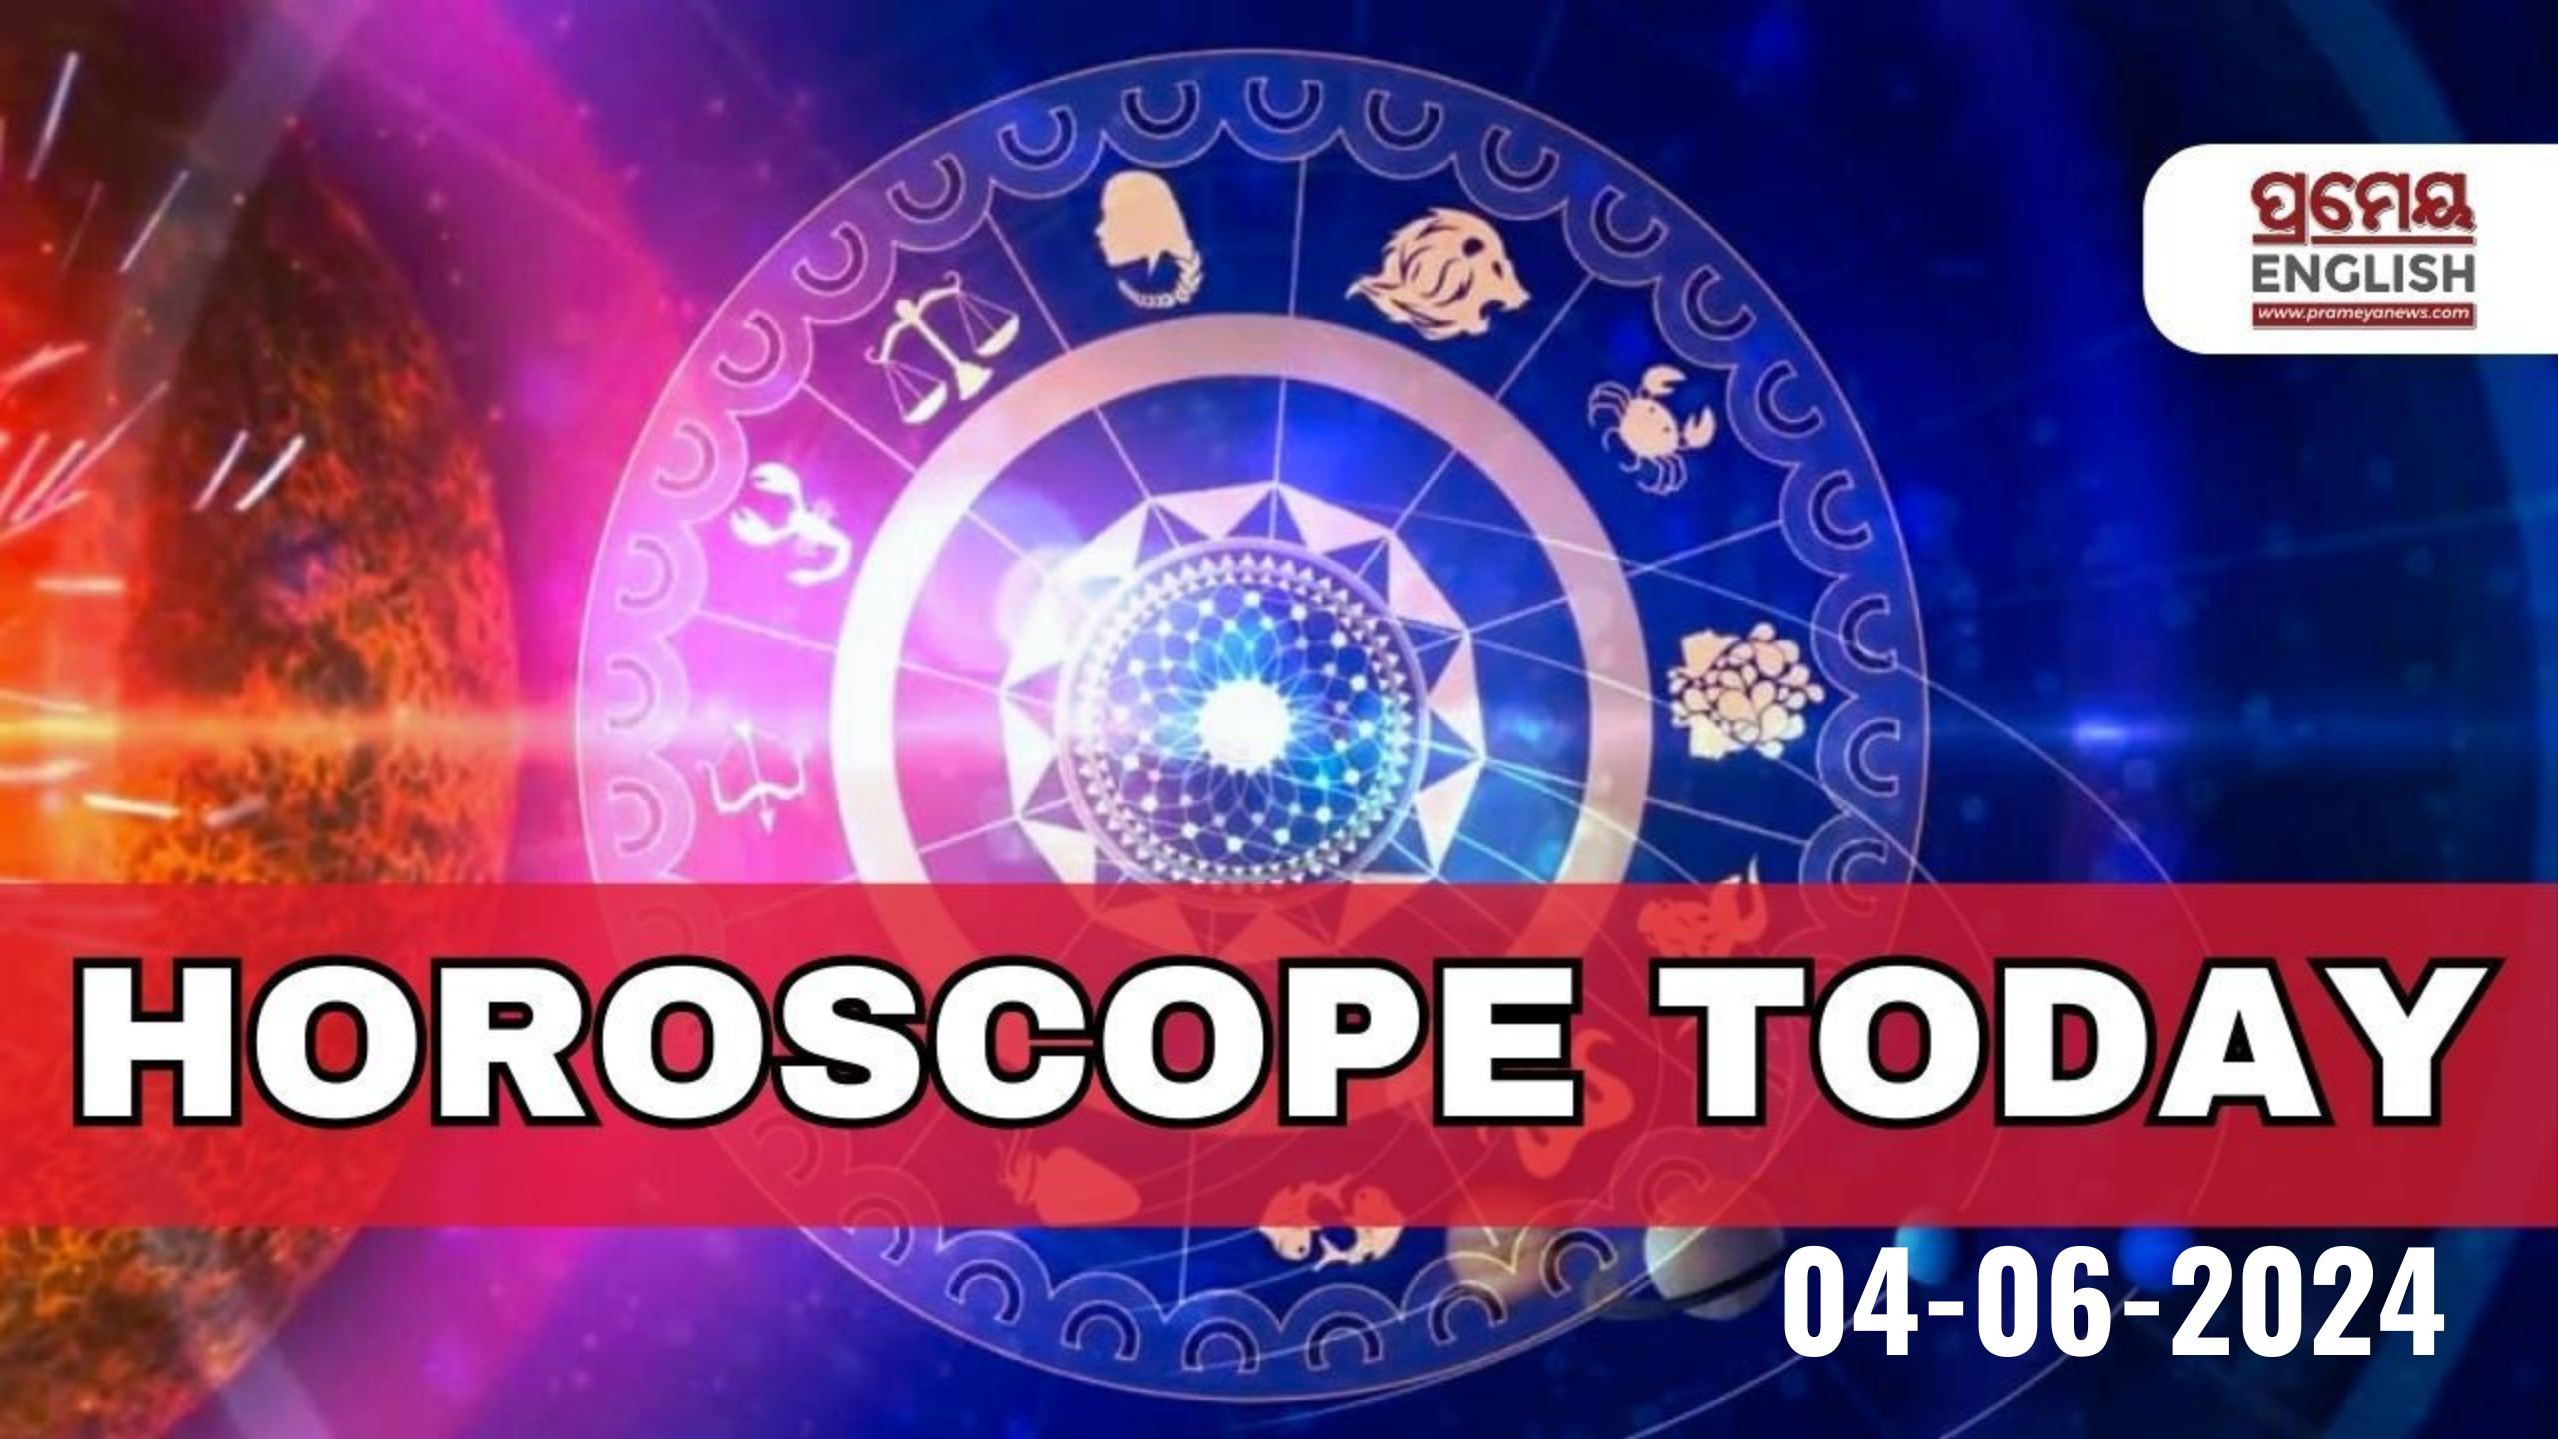 Horoscope Today: Astrological prediction for June 4, 2024